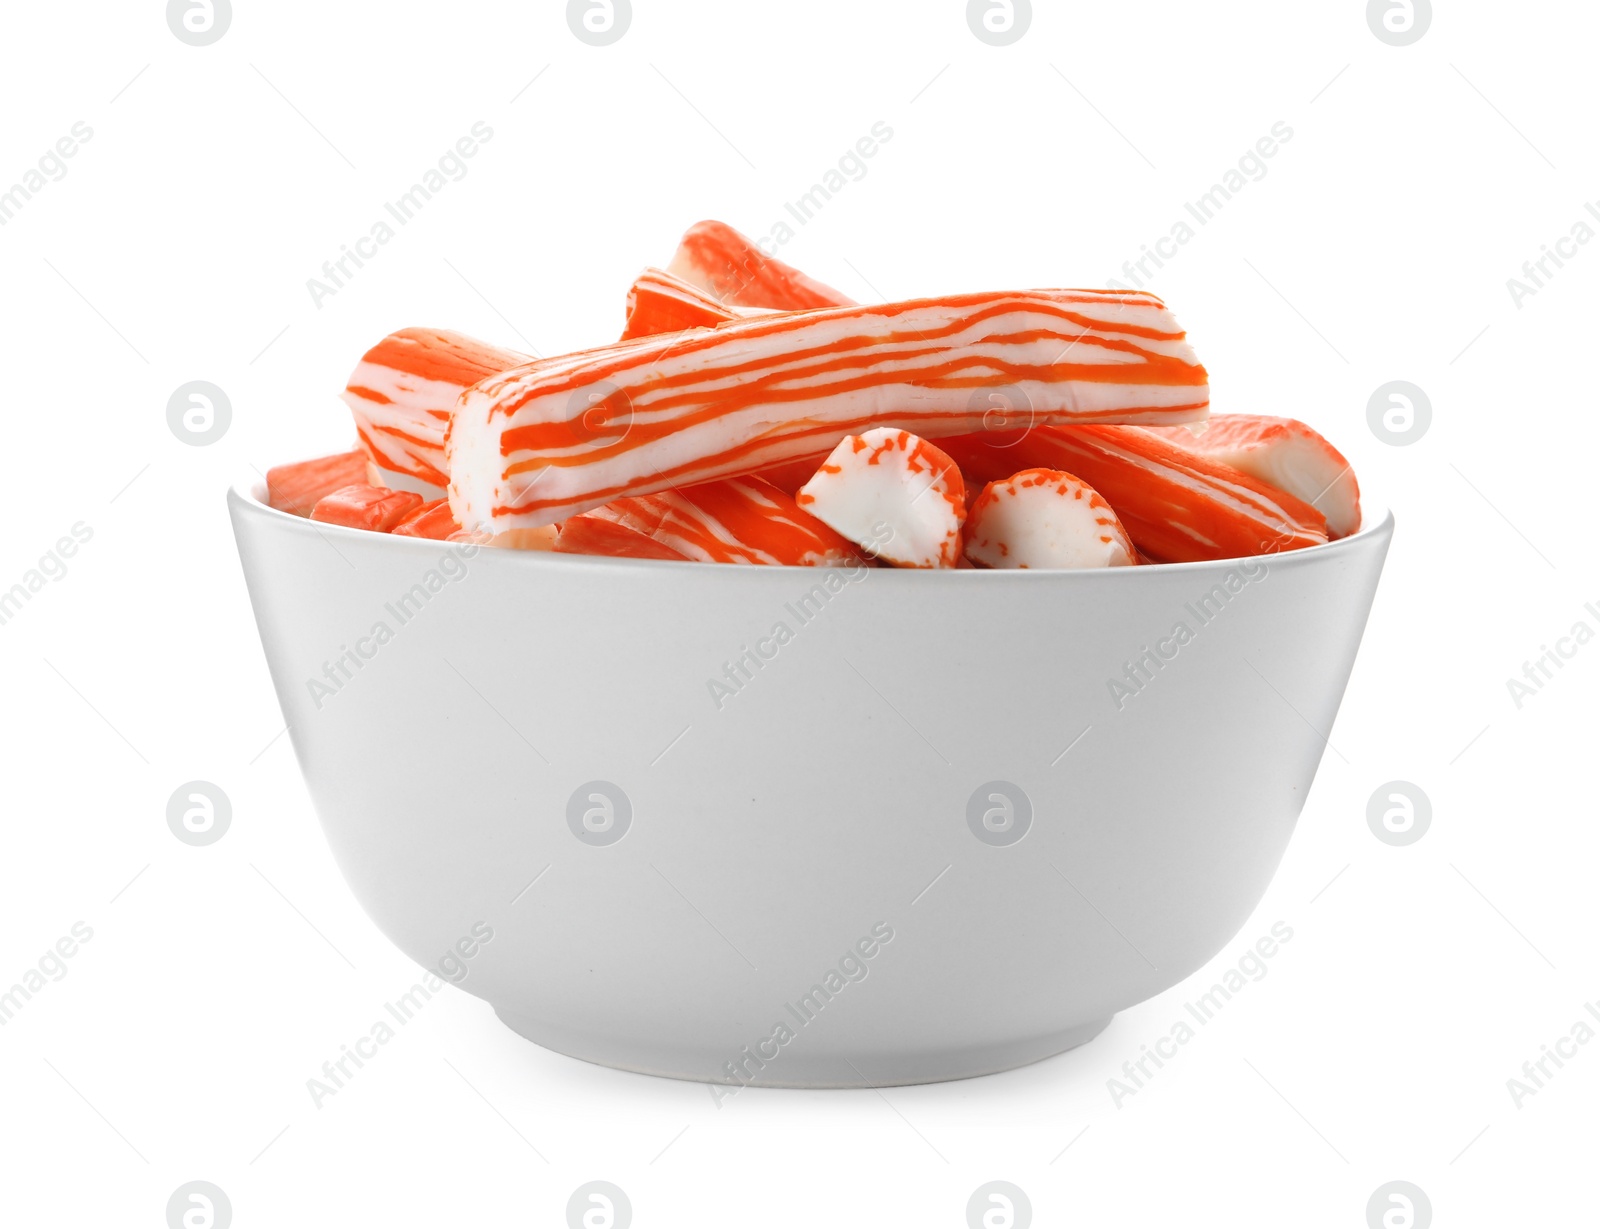 Photo of Crab sticks in bowl on white background